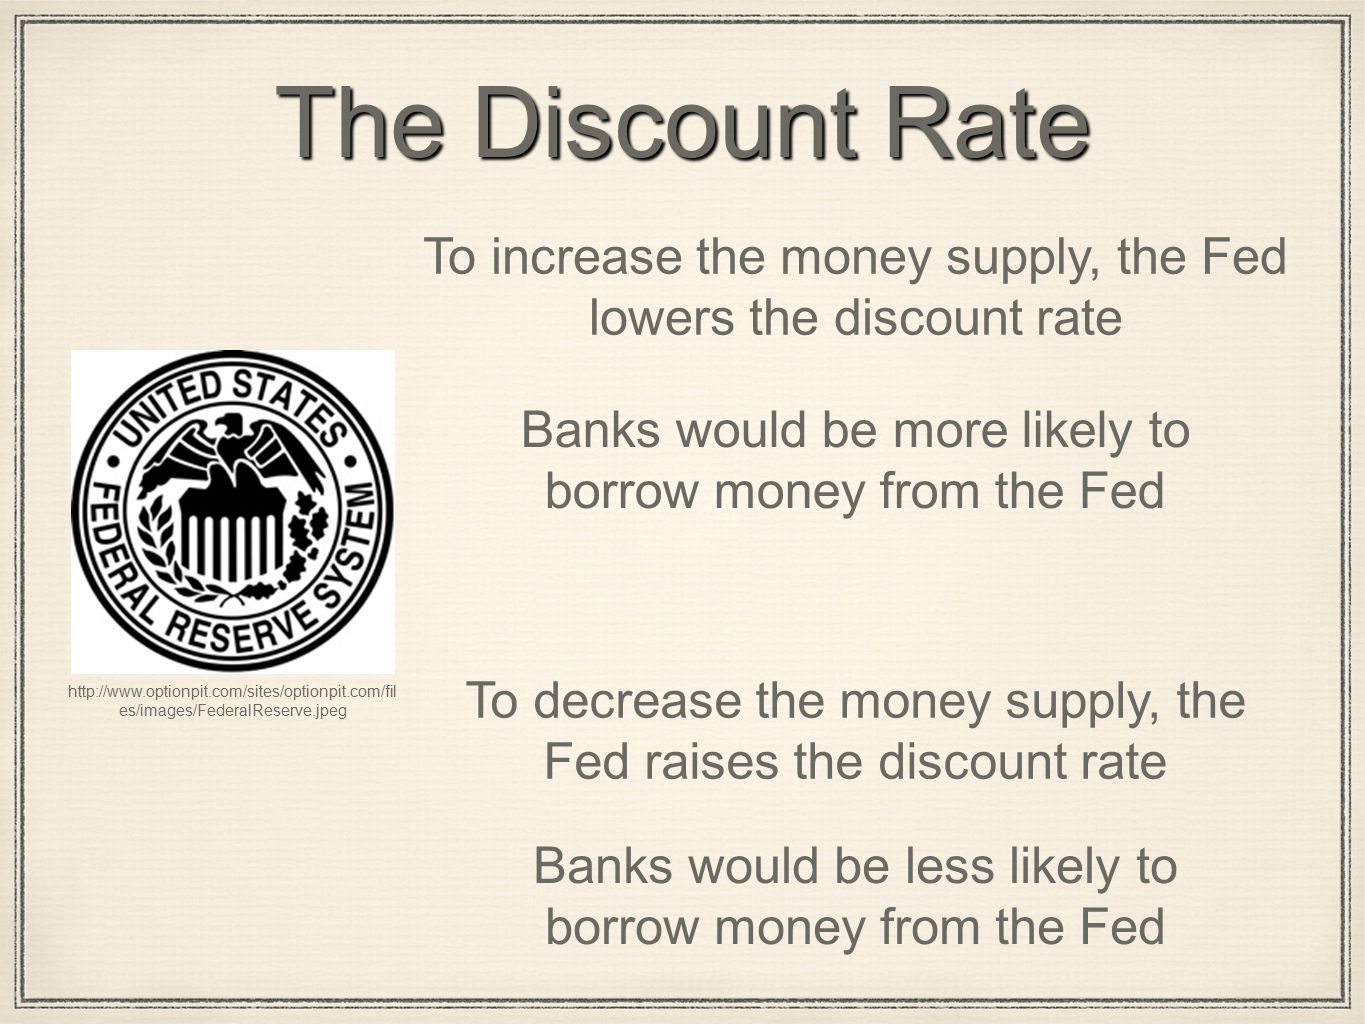 The Discount Rate   es/images/FederalReserve.jpeg To increase the money supply, the Fed lowers the discount rate Banks would be more likely to borrow money from the Fed To decrease the money supply, the Fed raises the discount rate Banks would be less likely to borrow money from the Fed